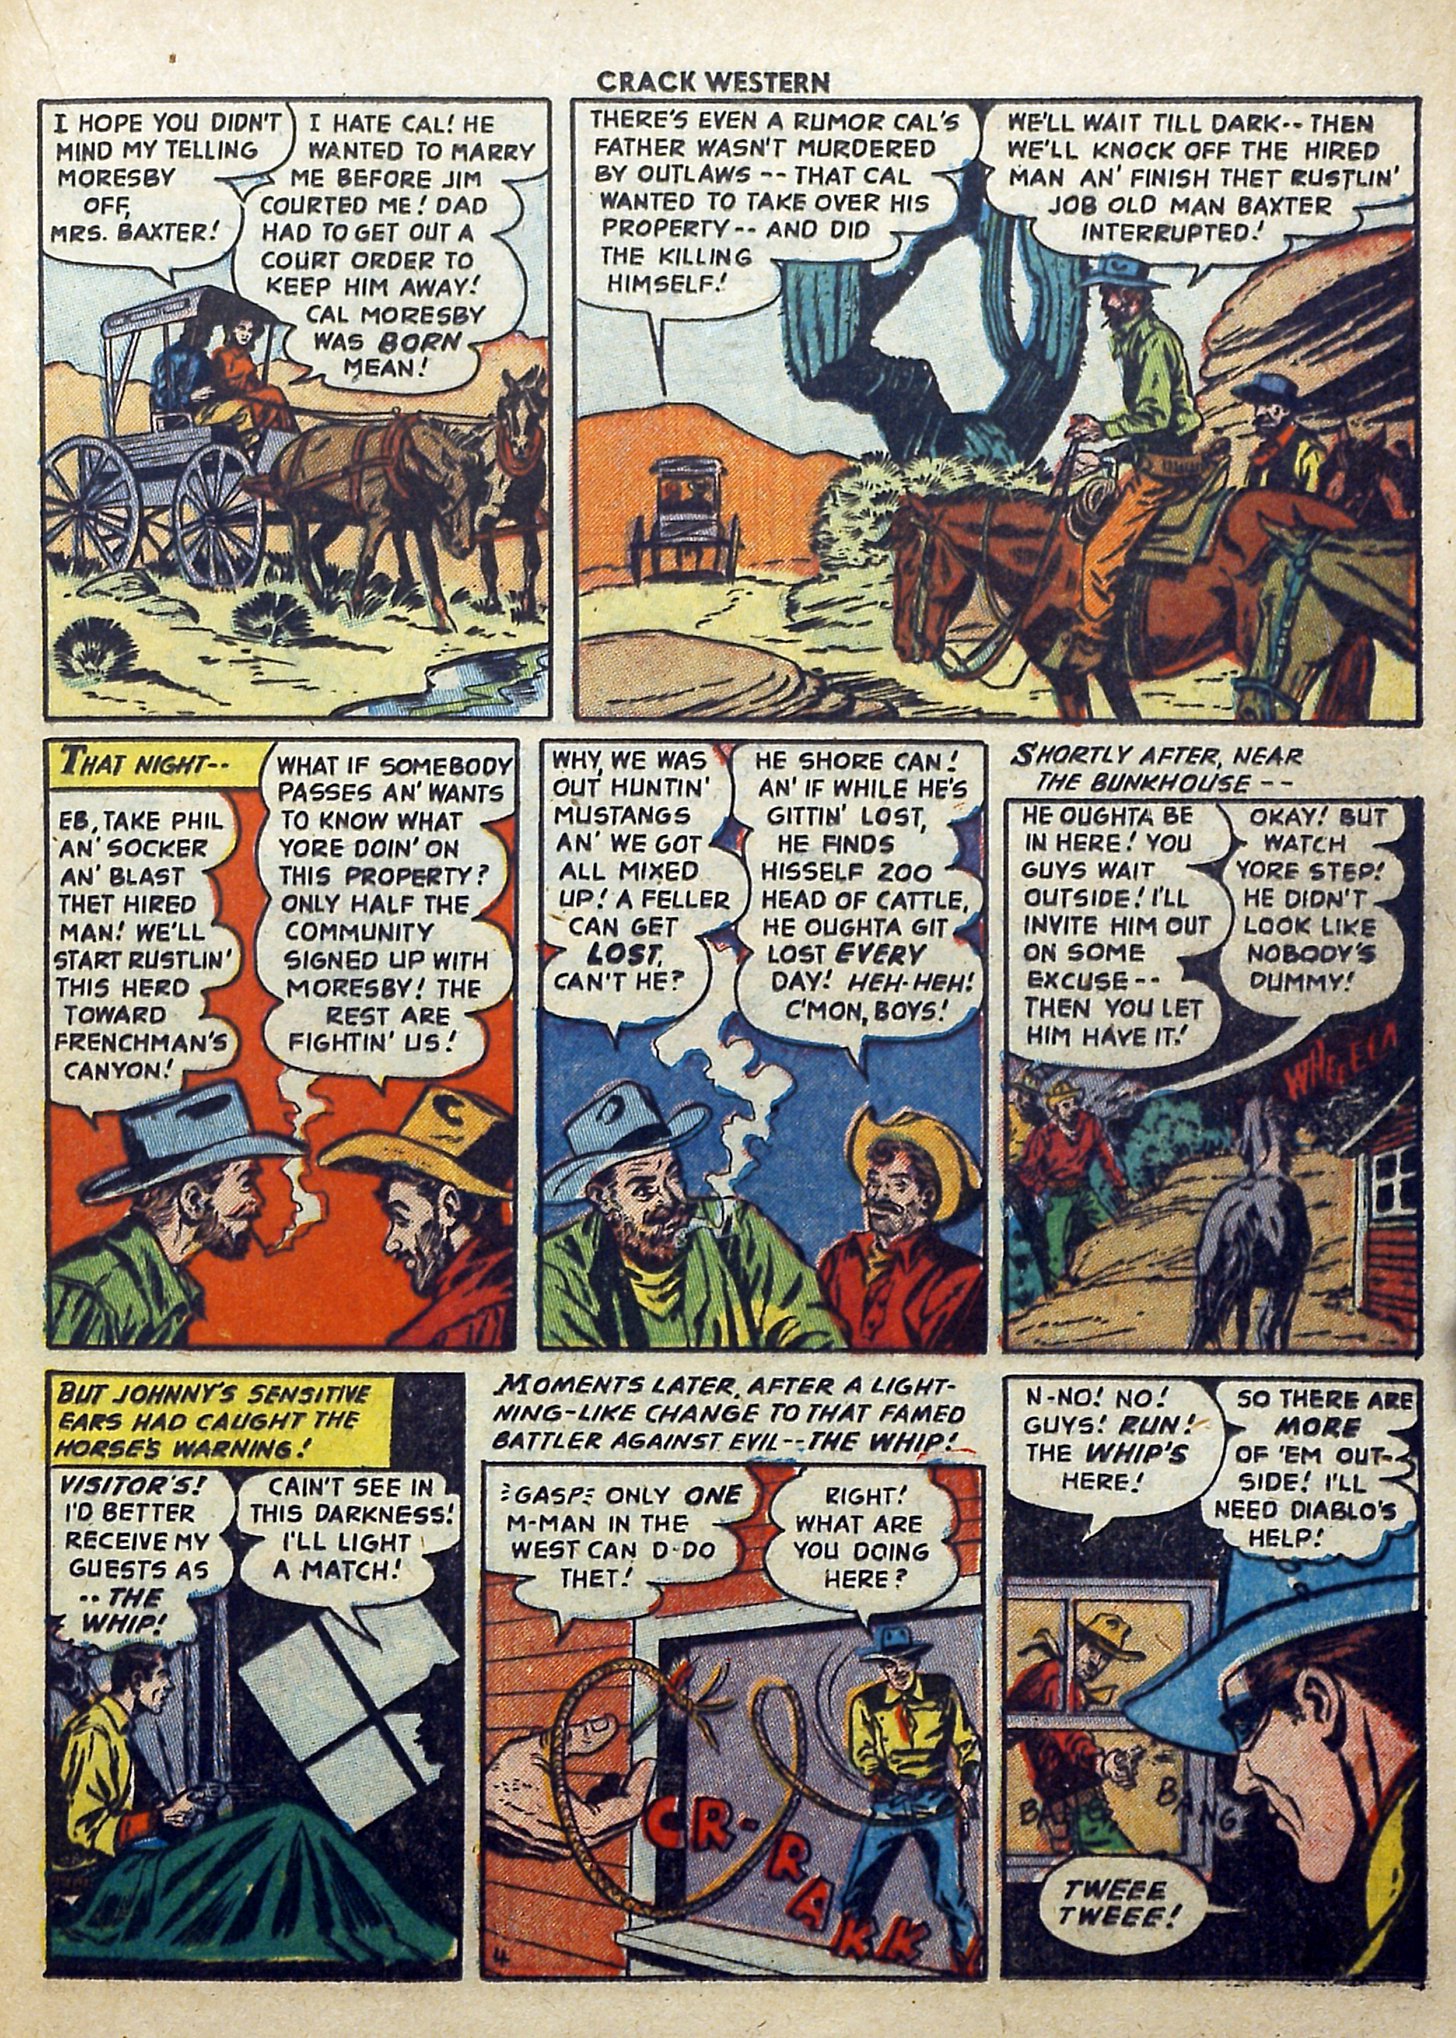 Read online Crack Western comic -  Issue #82 - 21